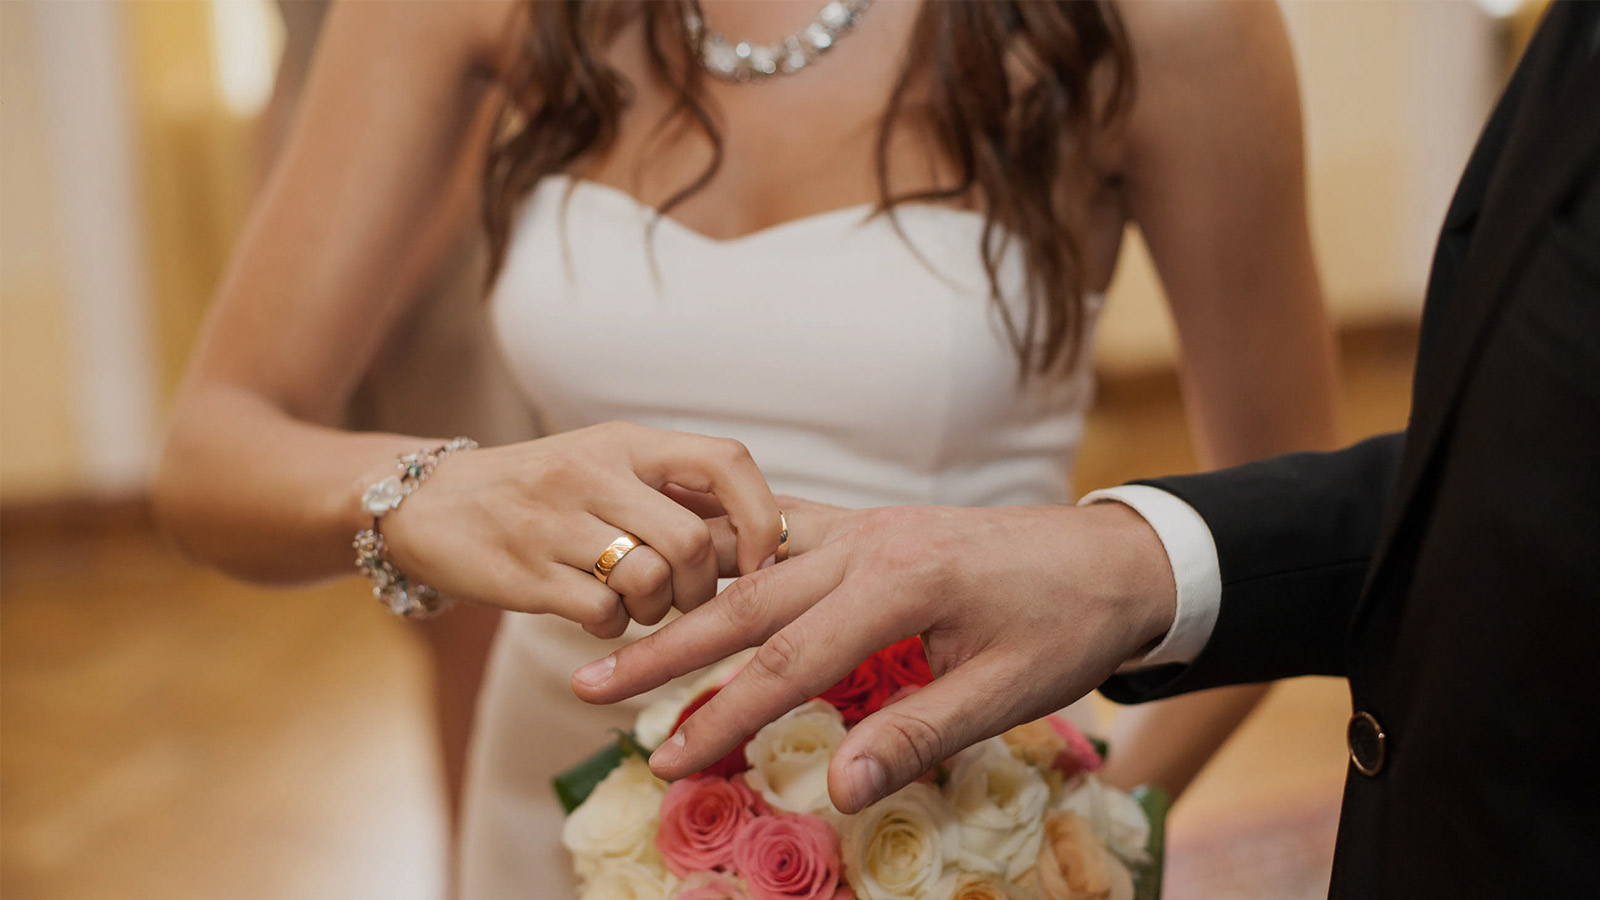 A woman in a wedding dress is putting on a wedding ring for the groom